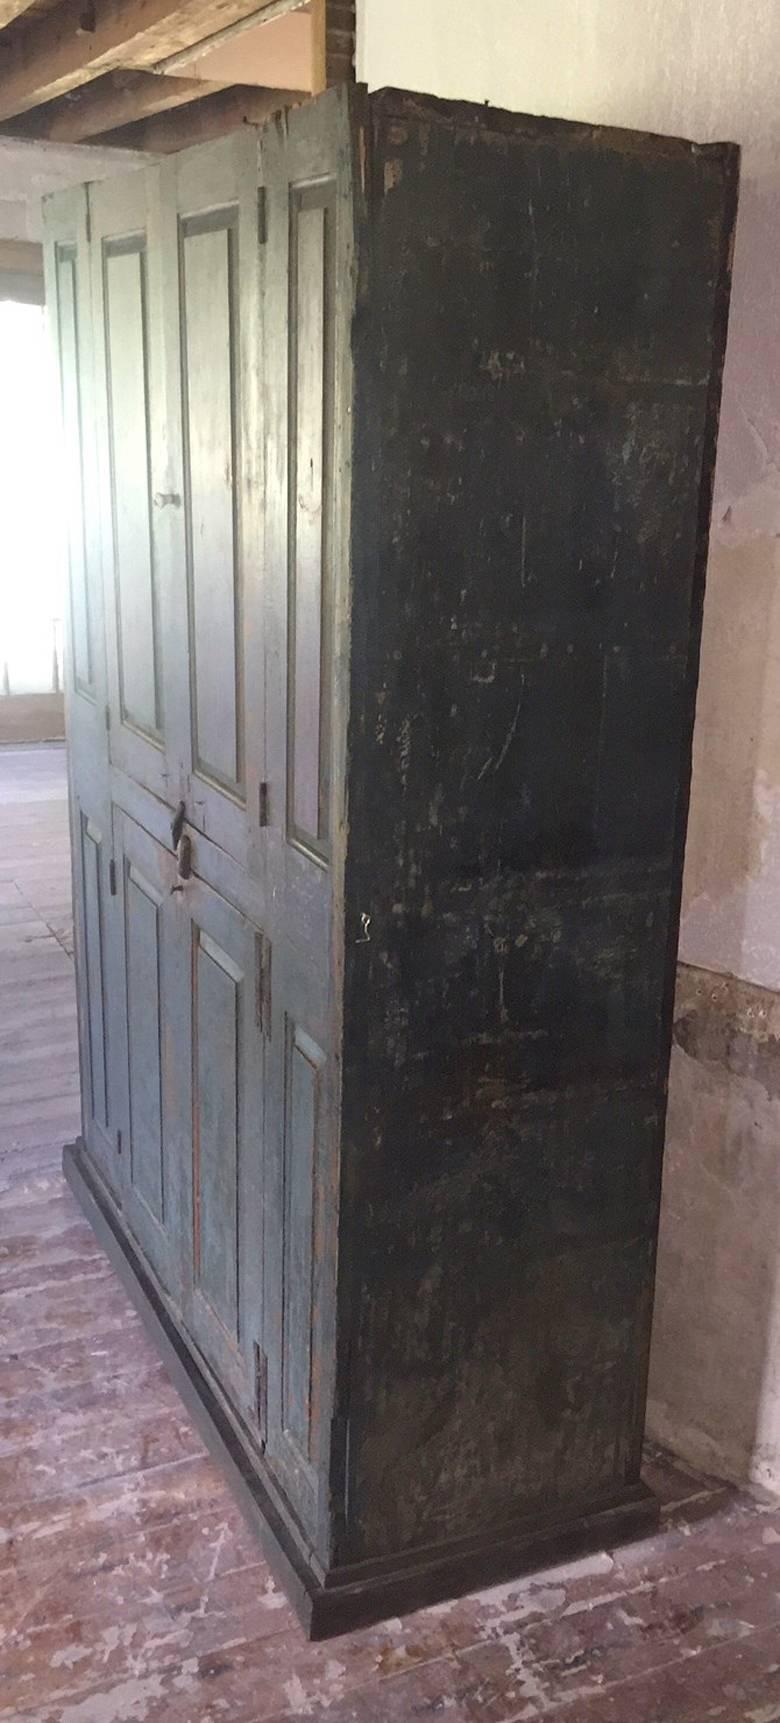 This is a wonderful large late 1700s blind door Hudson Valley cupboard, with original paint, it was dry scraped many many years ago.
It is in wonderful condition for its age. It has H hinges, some of which have been replaced with butt hinges many